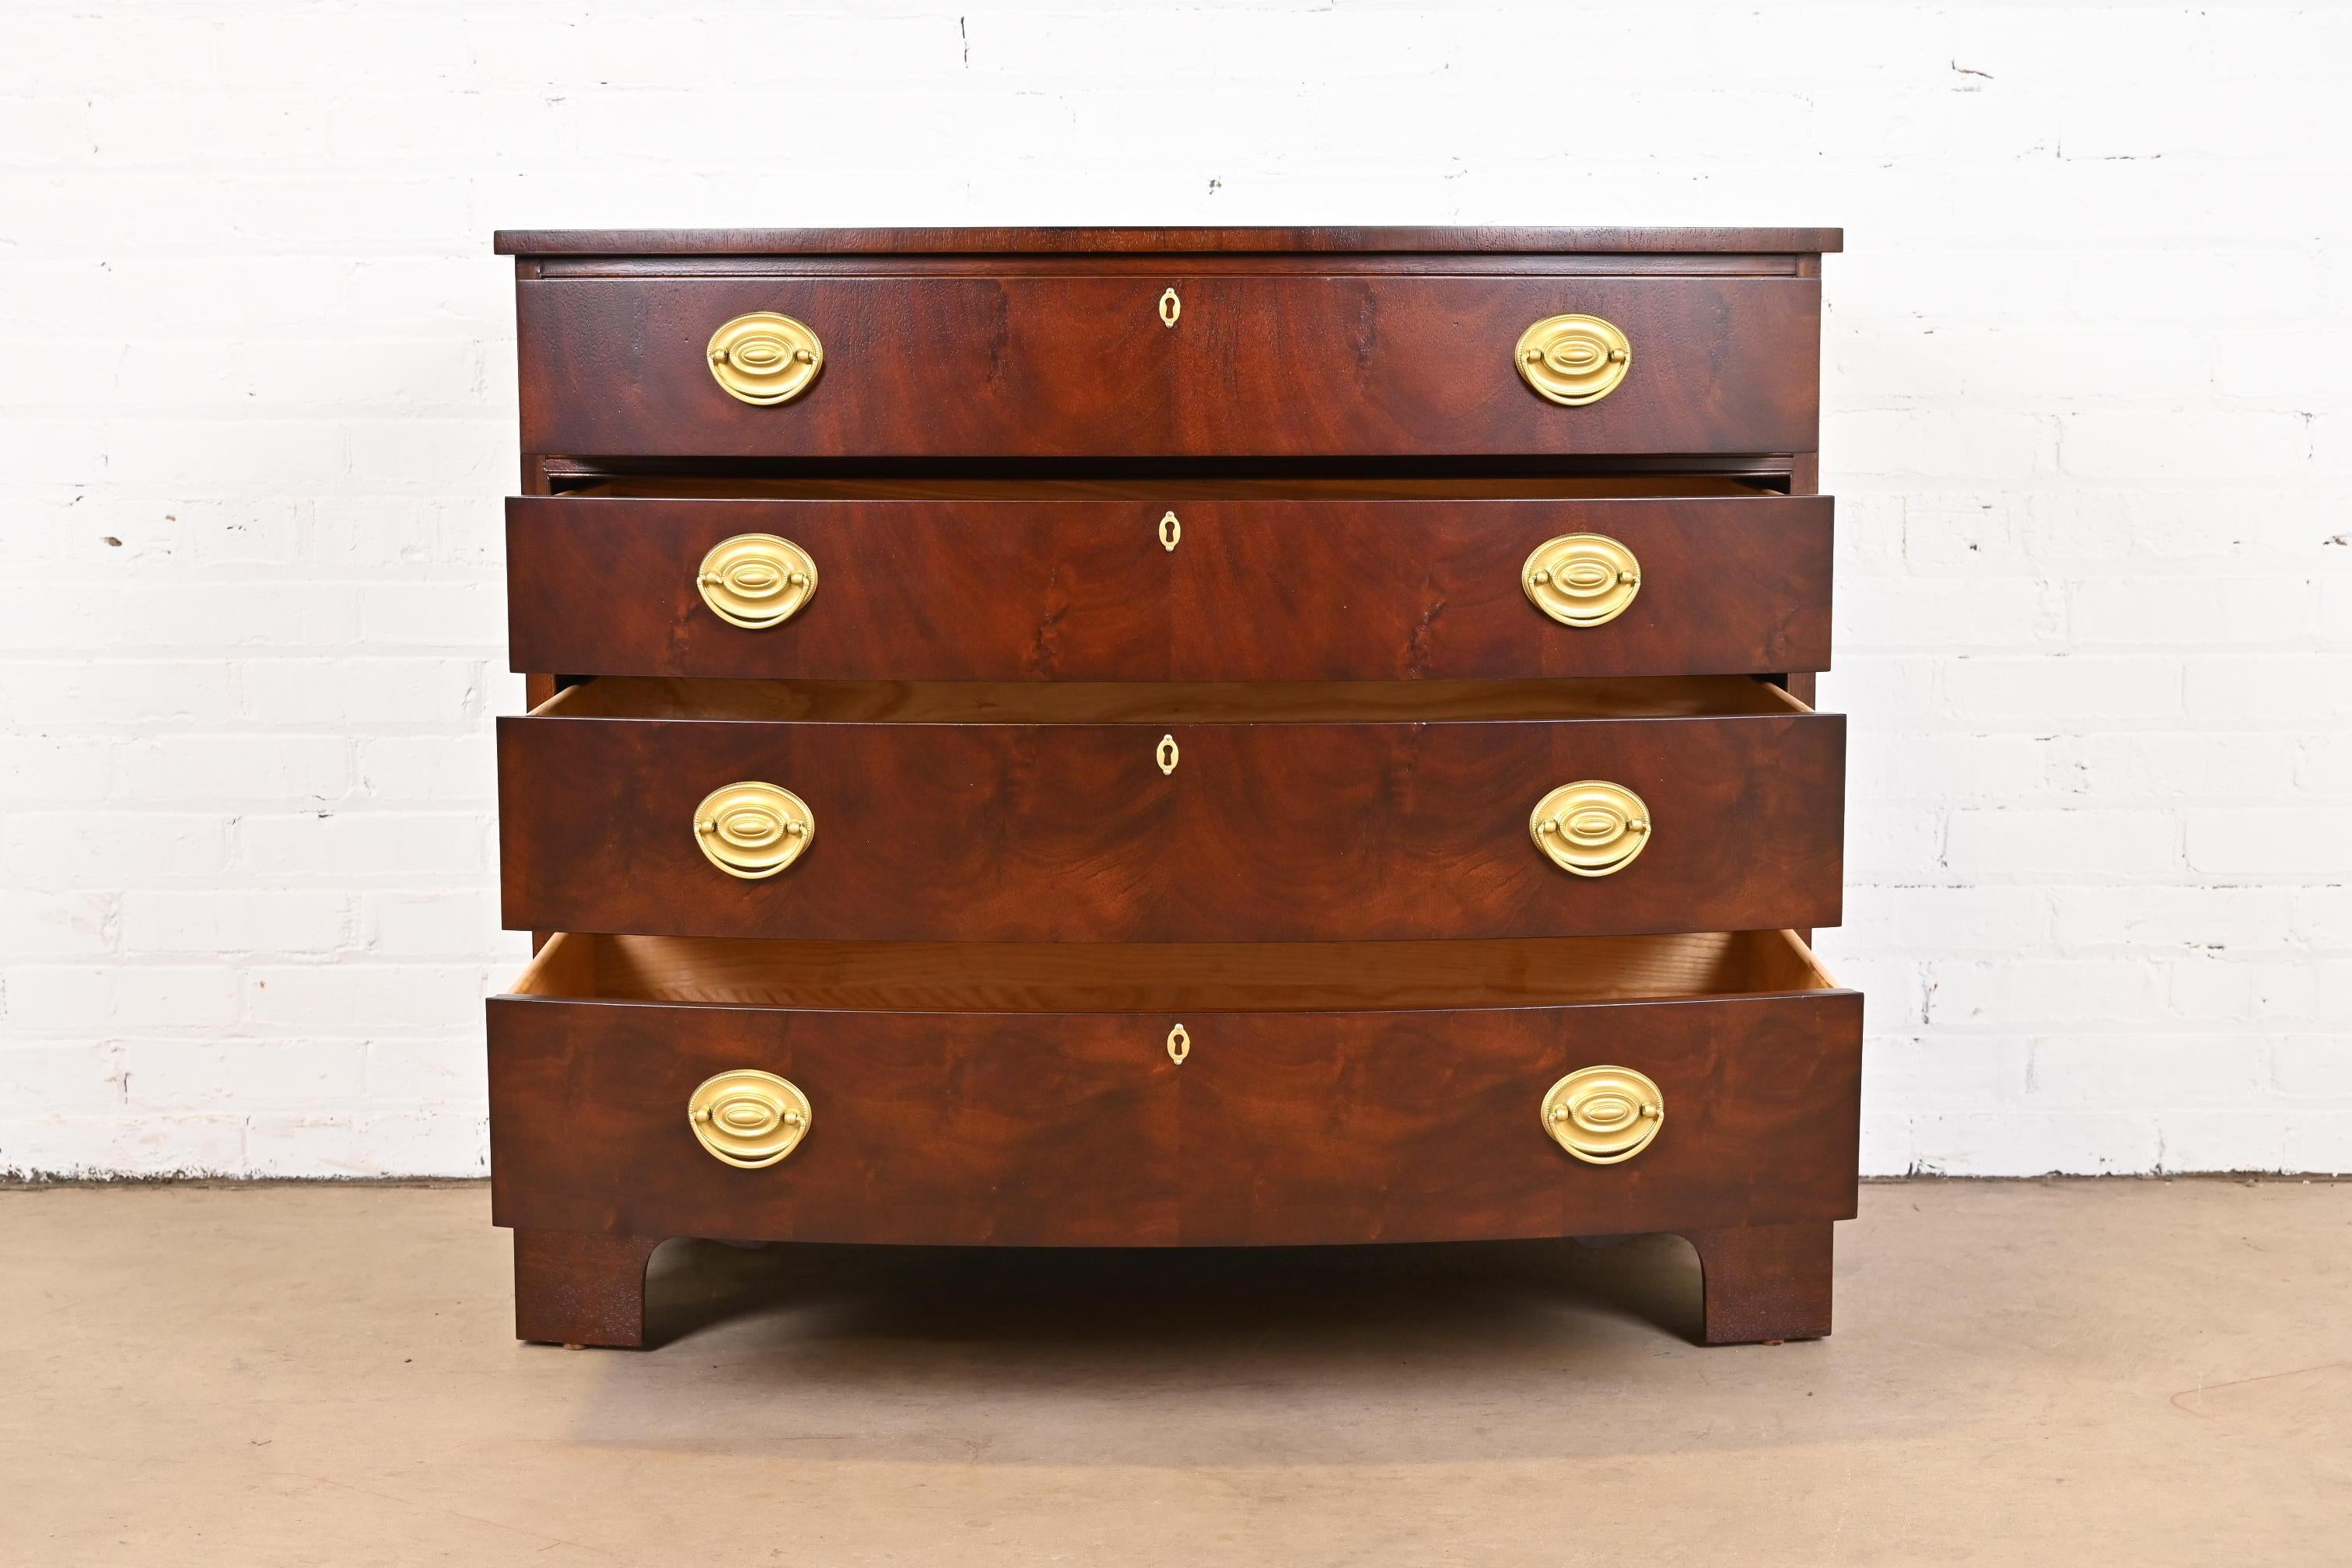 Brass Ethan Allen Georgian Flame Mahogany Bow Front Chest of Drawers, Newly Refinished